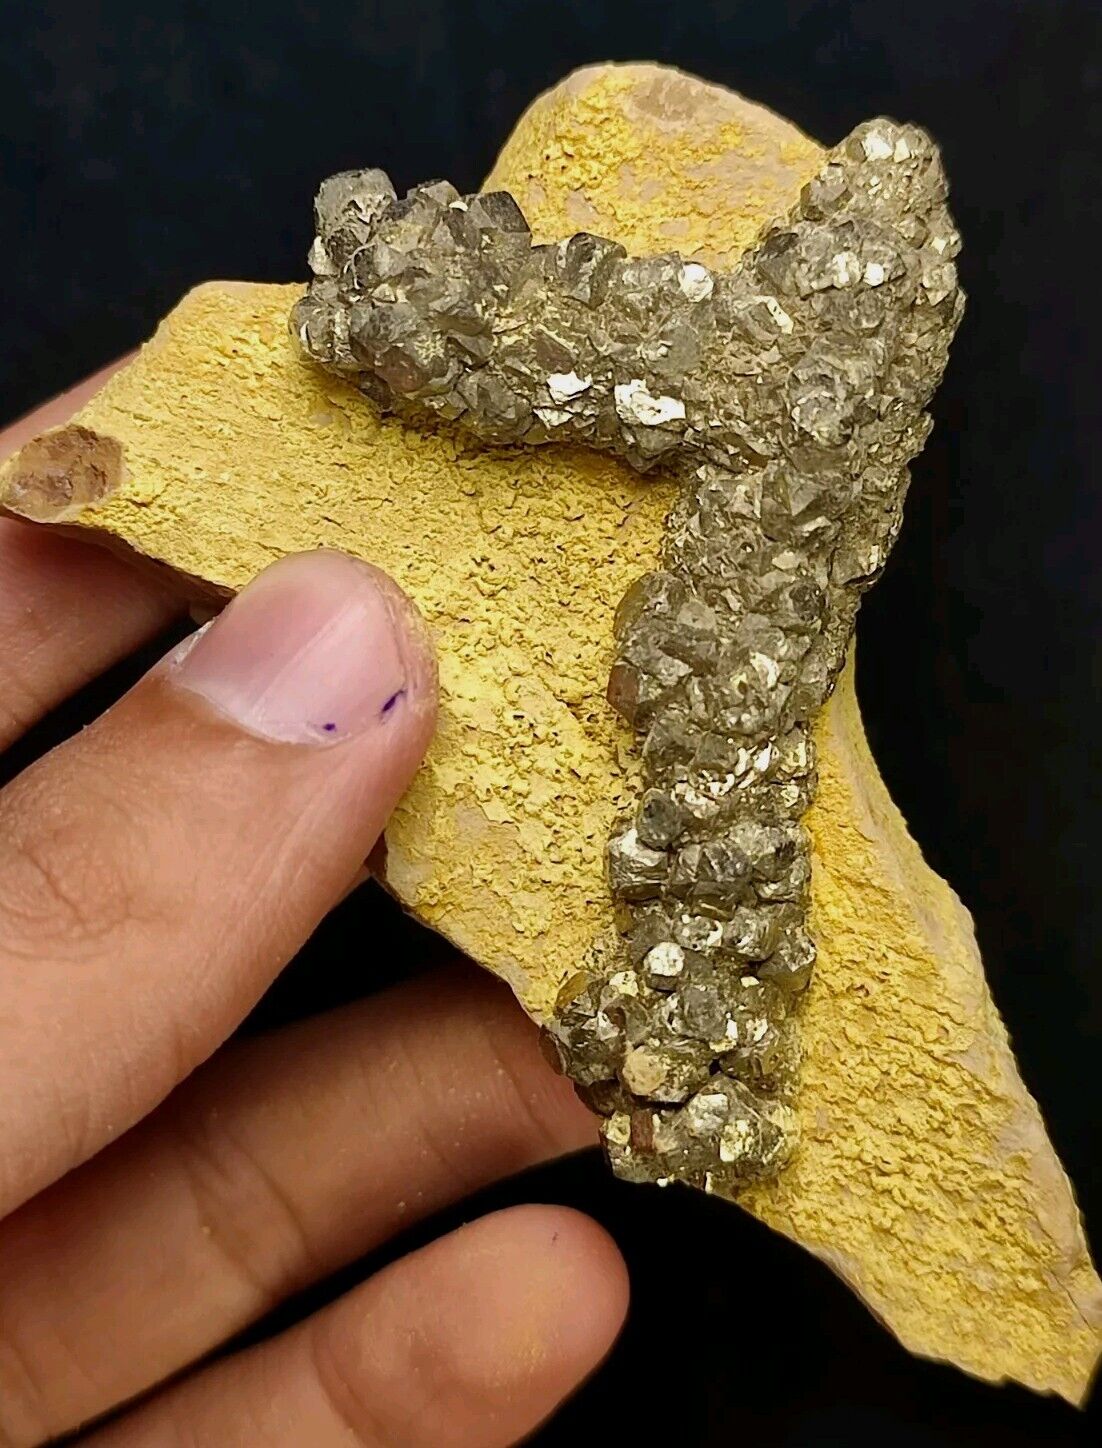 Natural Pyrite/Marcasite Beautiful Specimen On Matrix With Aesthetic Growth.